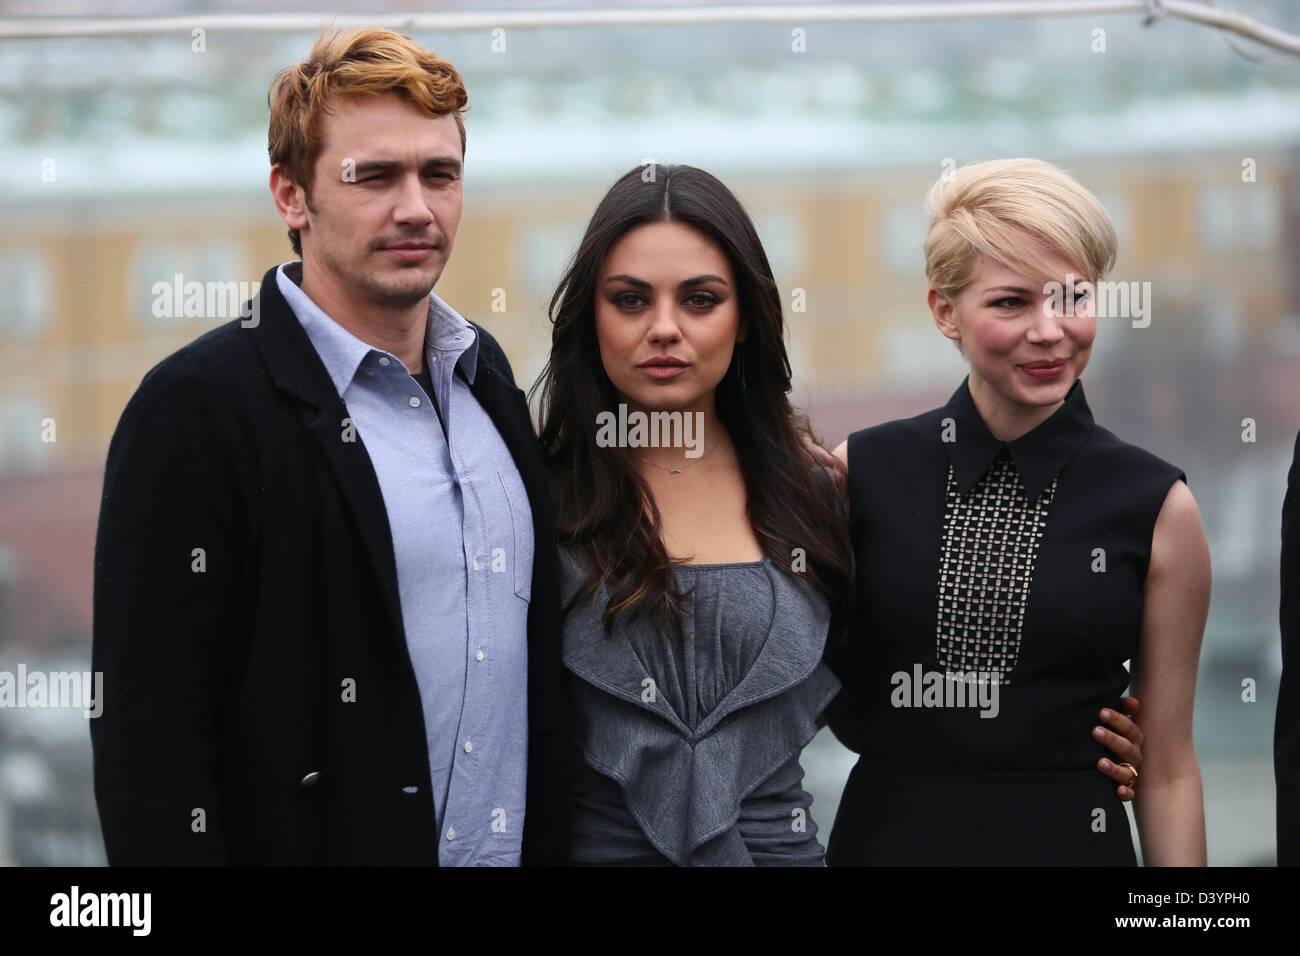 Moscow, Russia. 27th February 2013.  Pictured: l-r American actor James Franco,actress Mila Kunis and actress Michelle Williams at the photocall to promote Russian premier of the Oz the Great and Powerful. (Credit Image: Credit:  PhotoXpress/ZUMAPRESS.com/Alamy Live News) Stock Photo